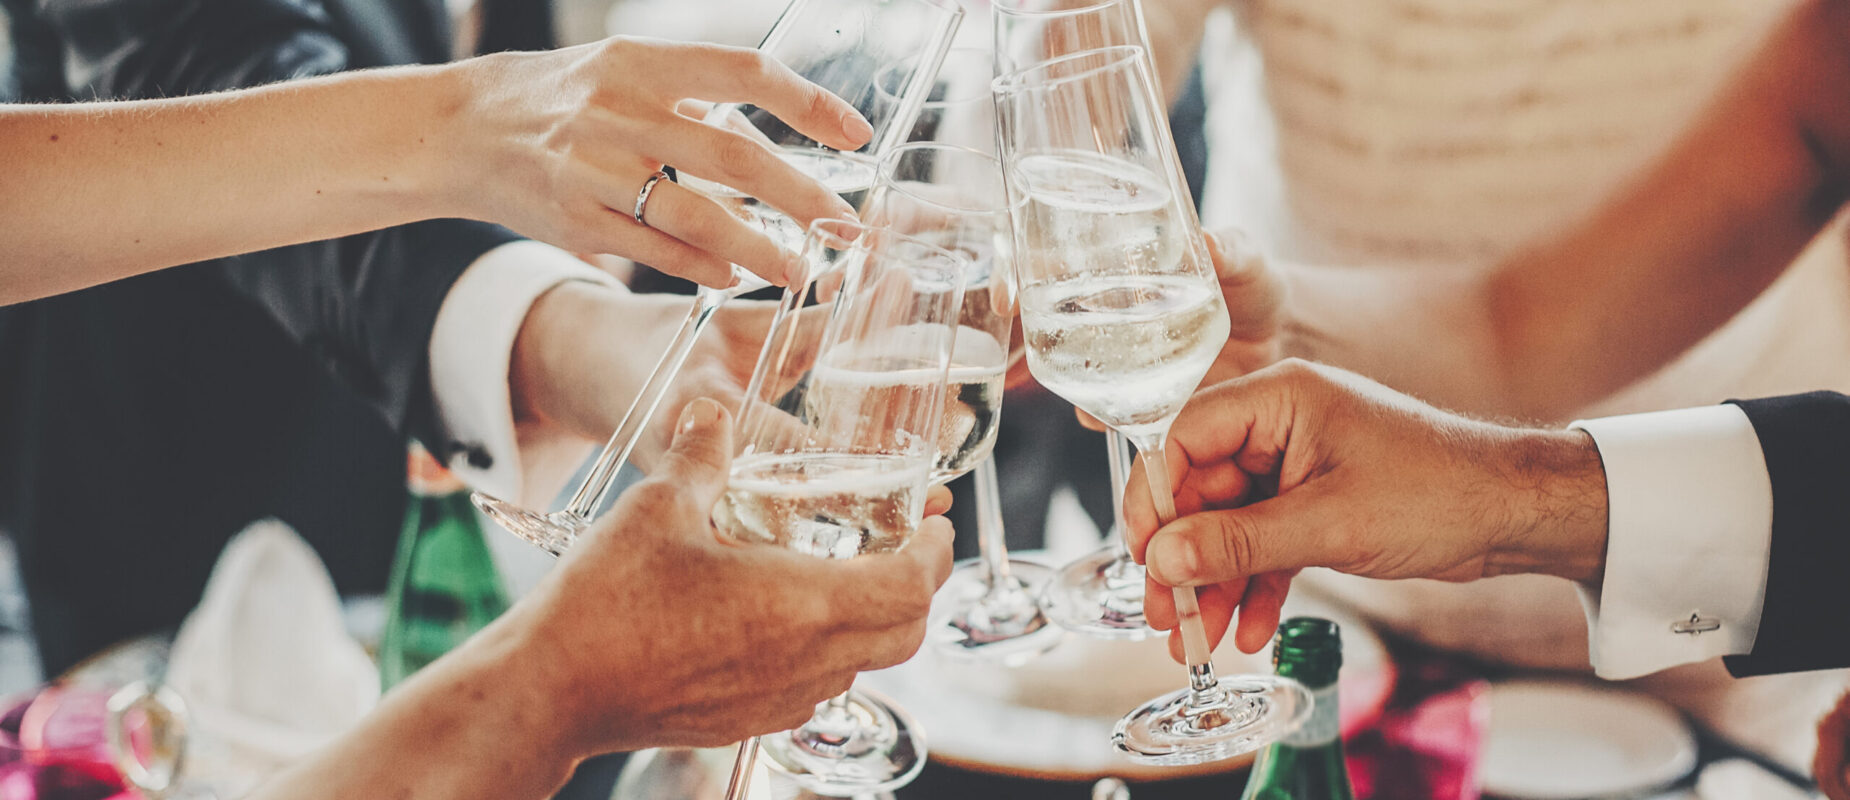 Hands toasting with champagne glasses at wedding reception outdoors in the evening. Family and friends clinking glasses and cheering with alcohol at delicious feast celebration. Christmas party